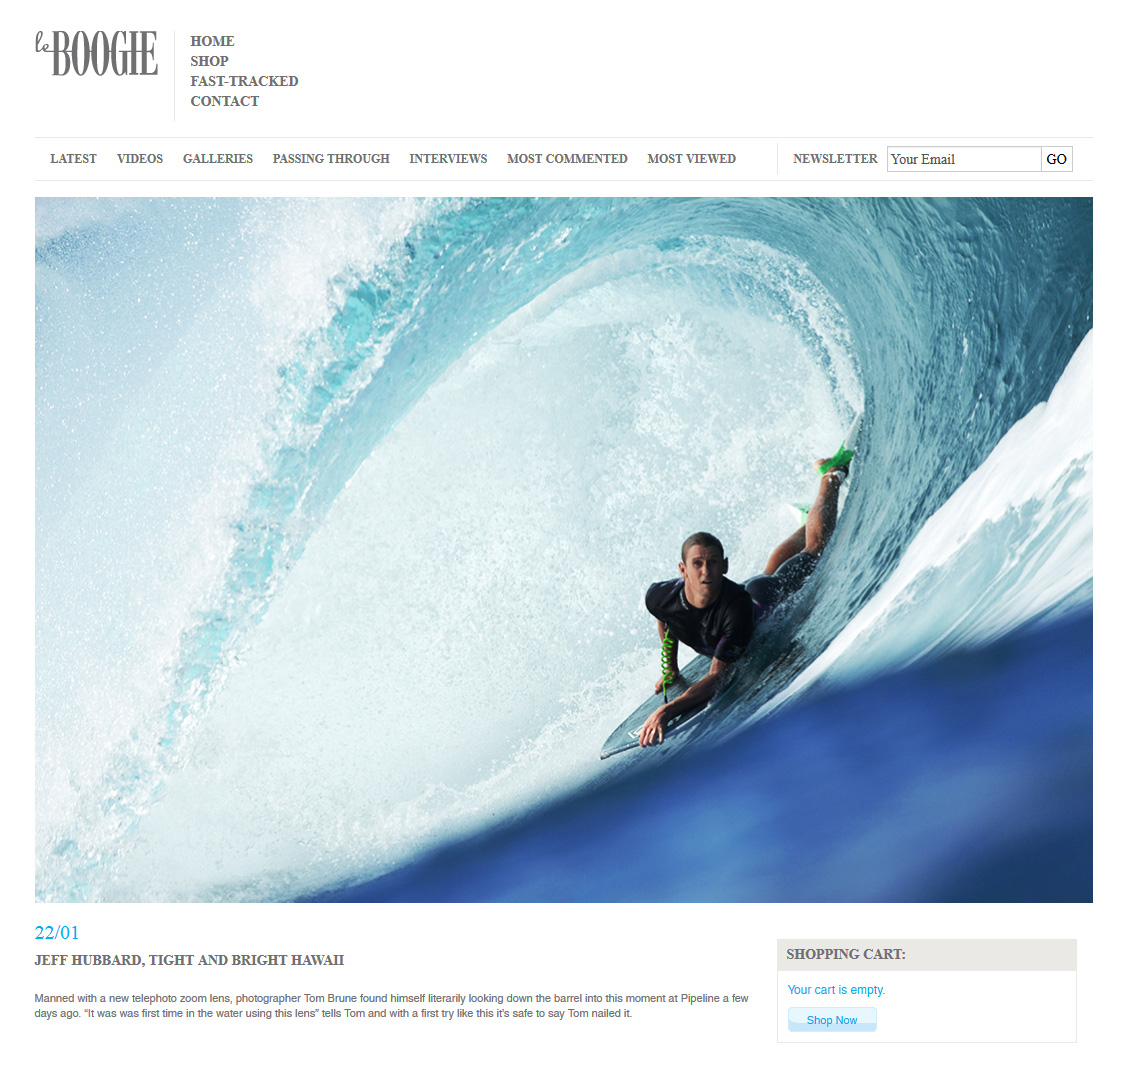 Tom Brune's photo of Jeff hubbard on the Le Boogie website